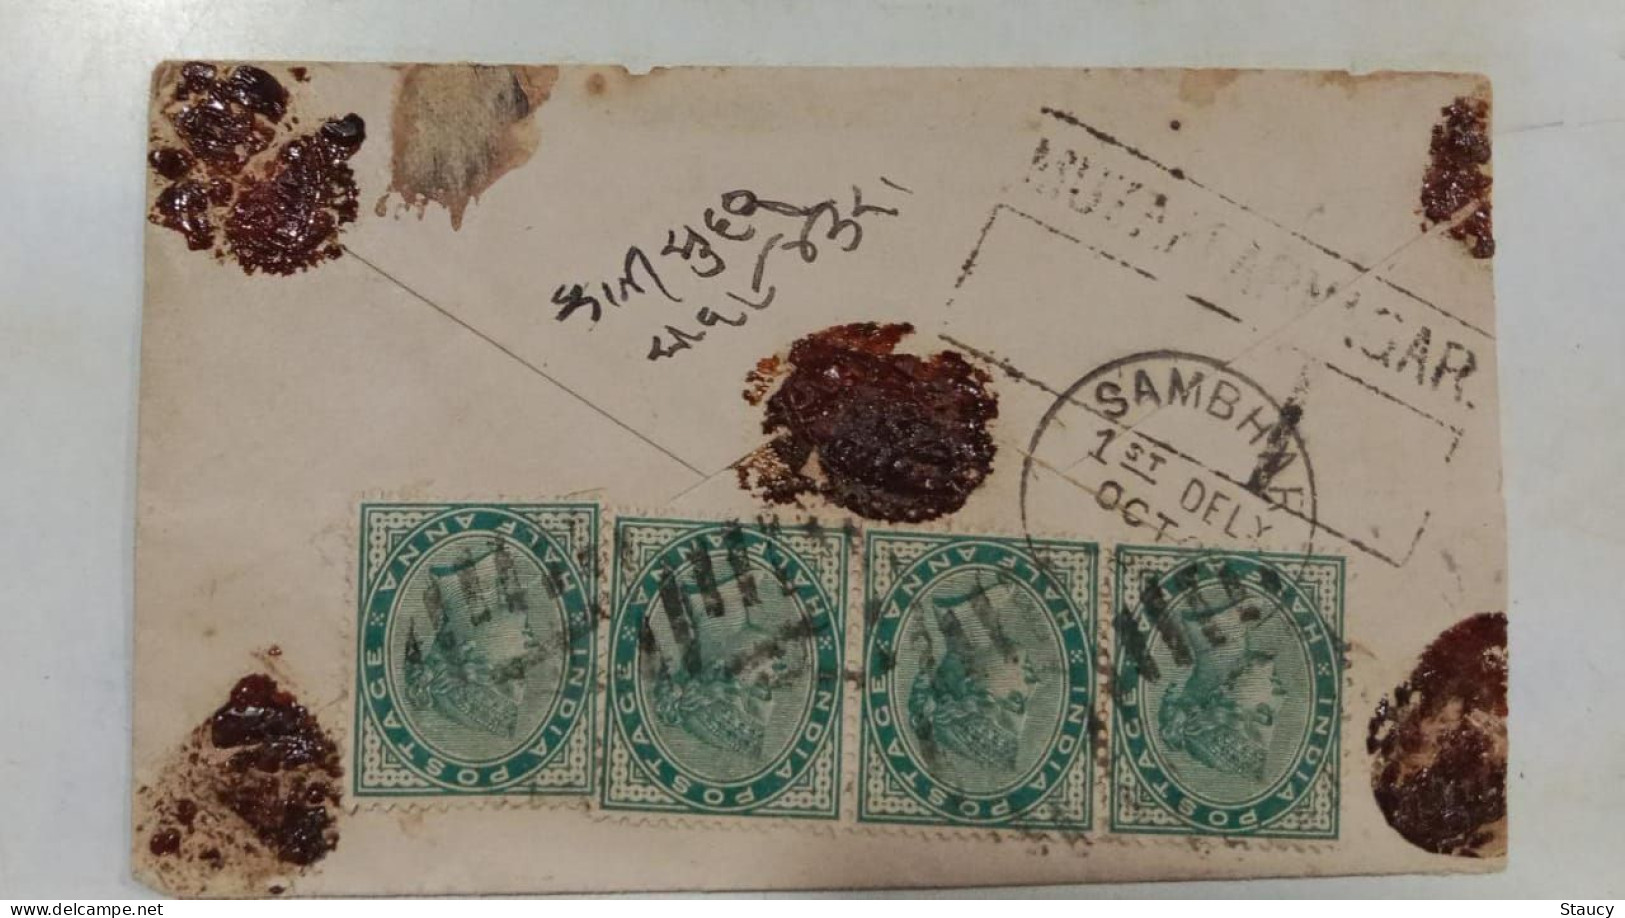 BRITISH INDIA 1889 QV 4 X 1/2a Half Anna FRANKING On 1/2a QV Stationery "JAYPORE STATE" REGISTERED COVER, NICE CANC F&B - Jaipur